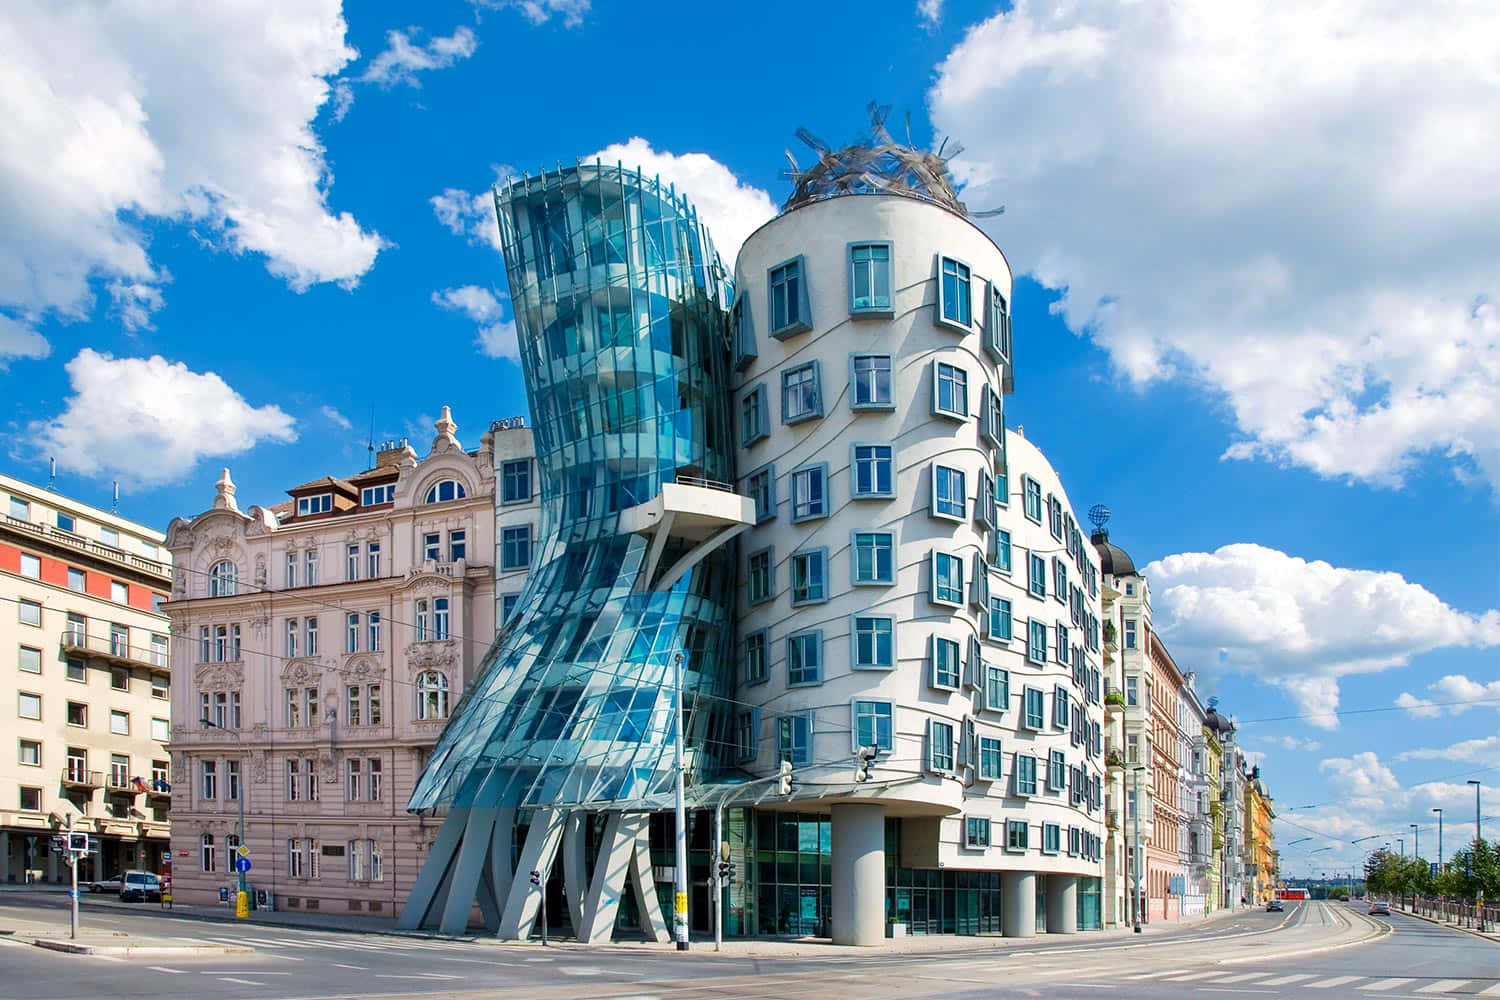 Hellersonniger Tag Am Dancing House. Wallpaper